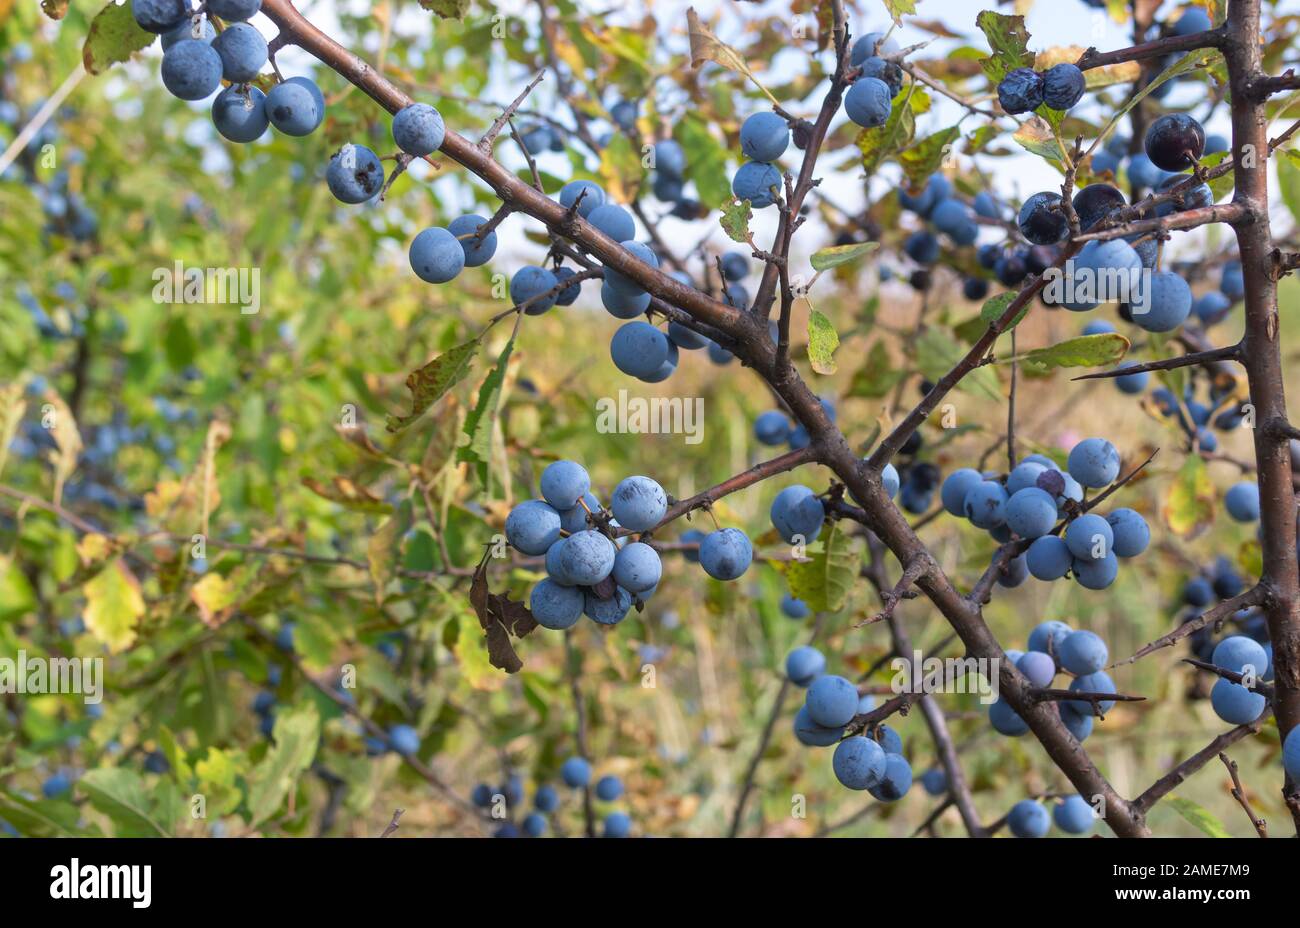 Wild plant prunus spinosa also called blackthorn closeup with blue round fruits  at fall season Stock Photo